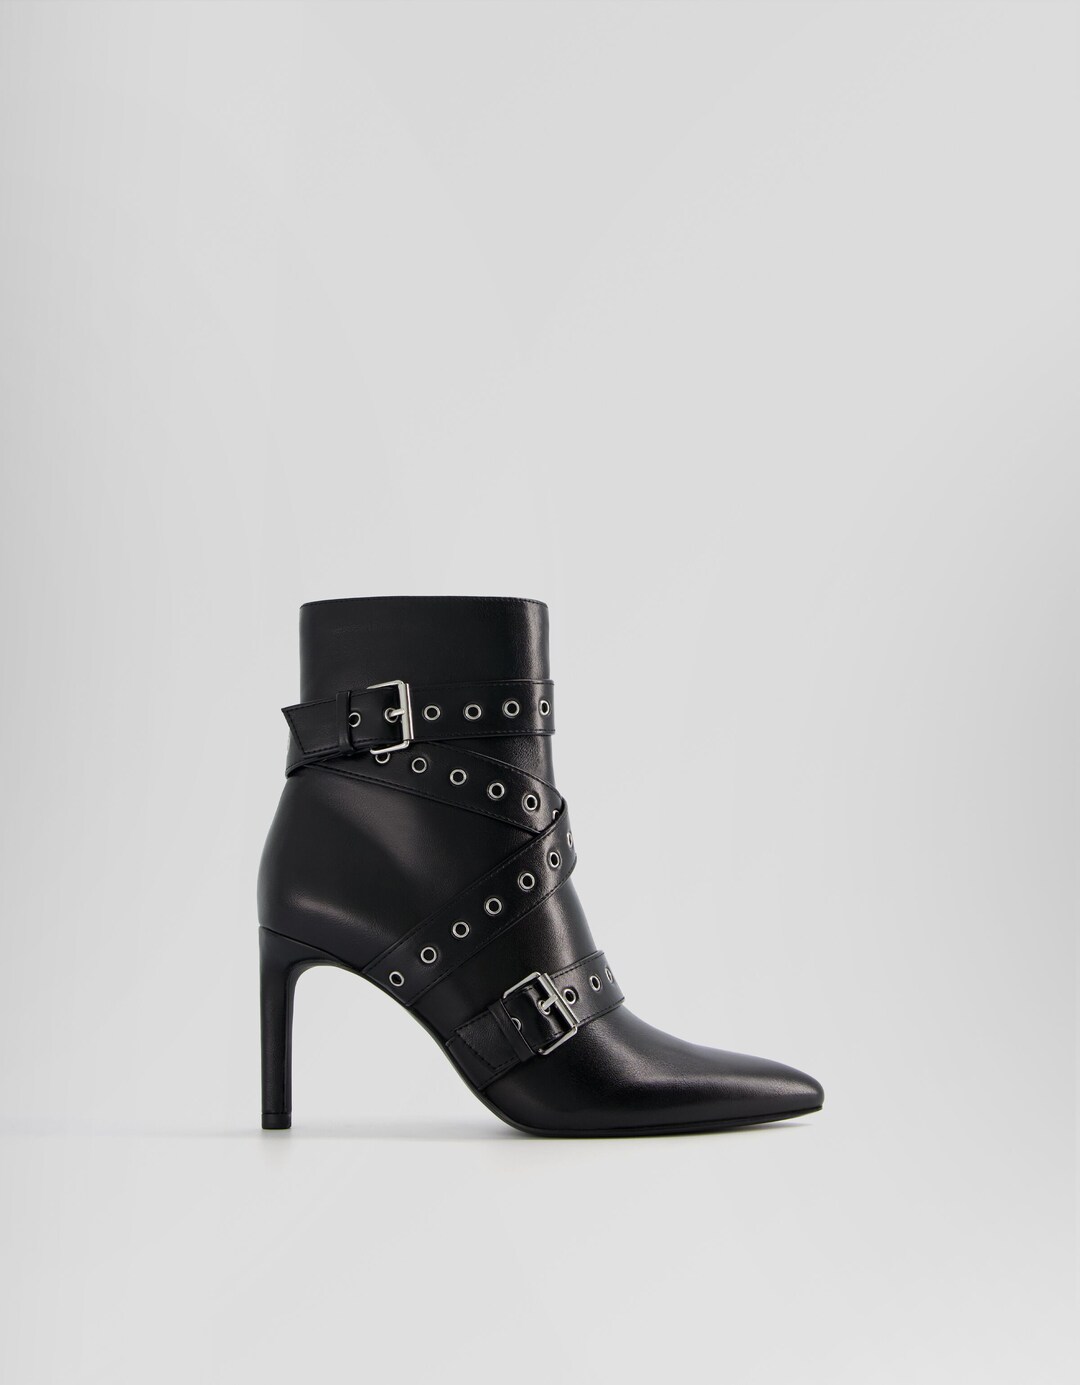 Stiletto-heel ankle boots with straps with eyelets and buckles